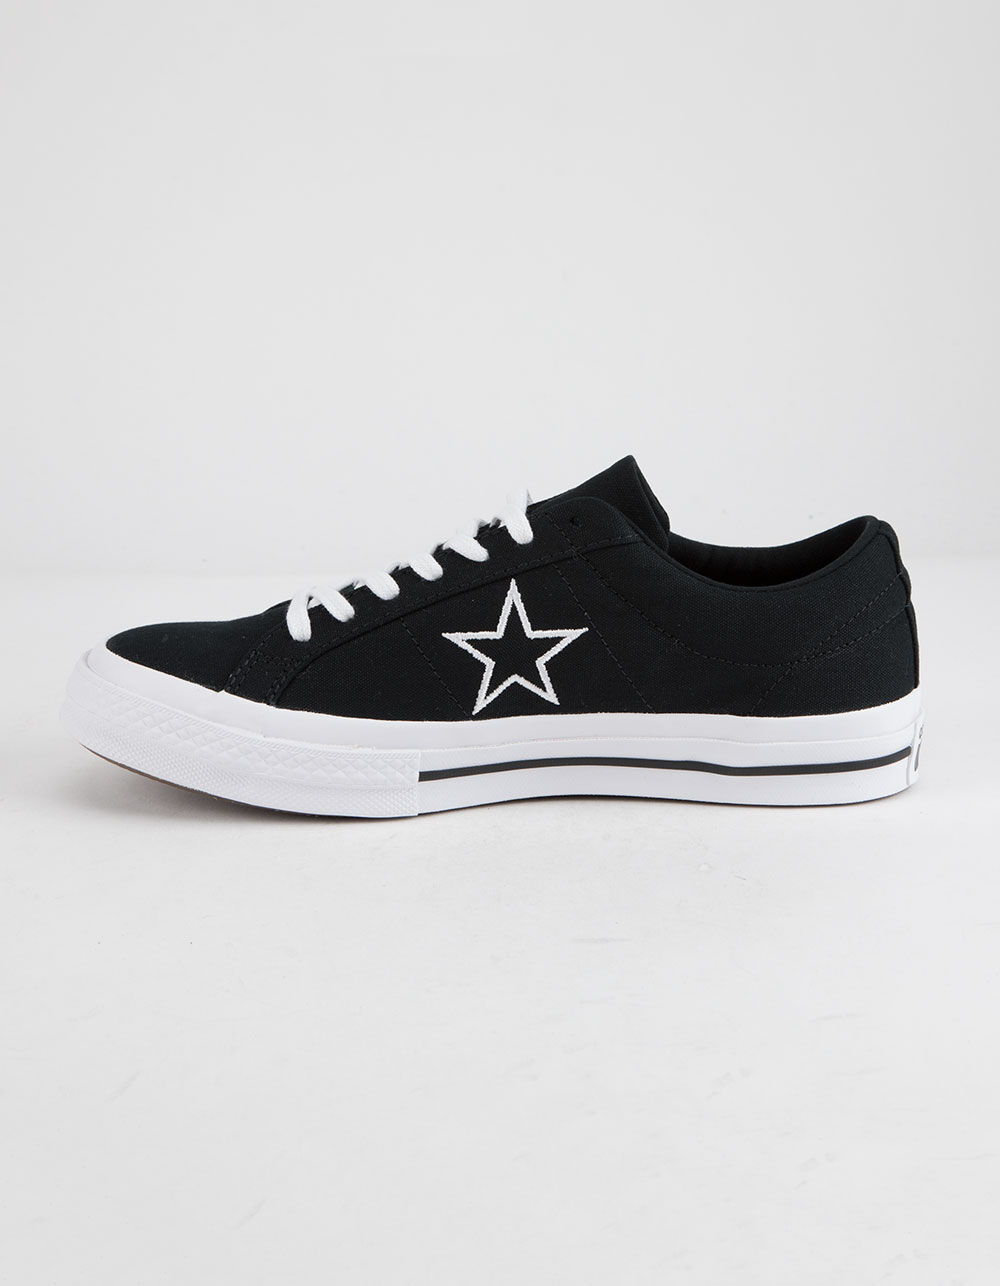 CONVERSE One Star Ox Black & White Low Top Shoes image number 3